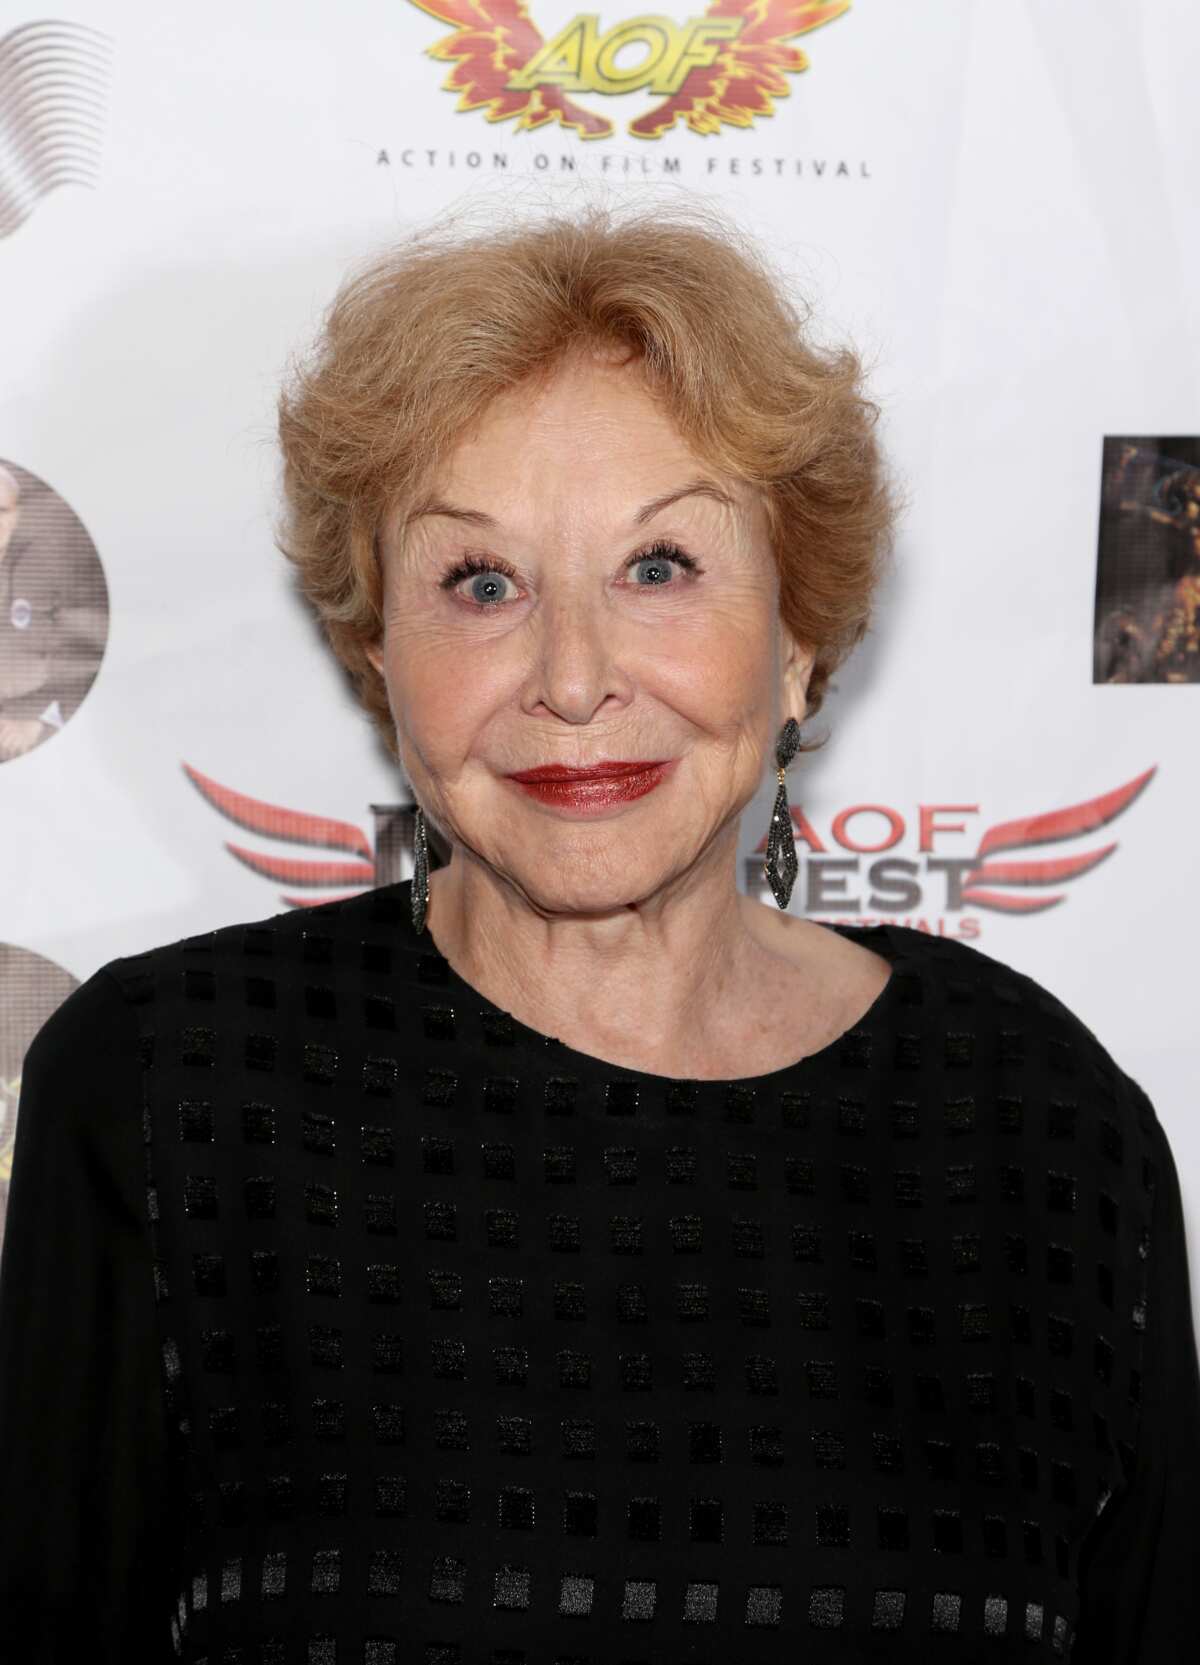 Michael Learned bio: age, spouse, net worth, movies and TV shows